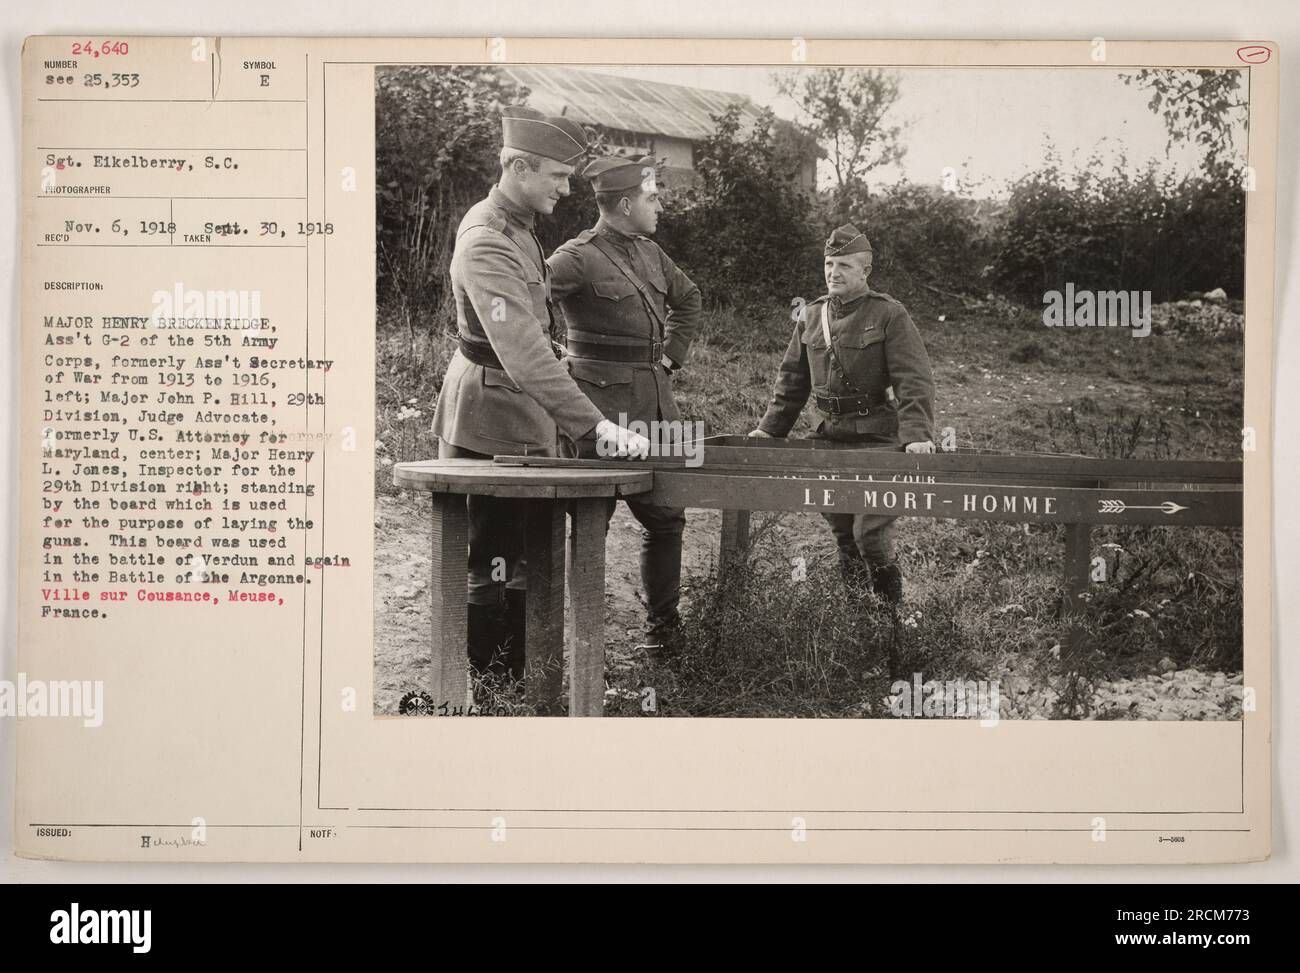 Major Henry Breckenridge, formerly Ass't Secretary of War, Major John P. Hill, U.S. Attorney, and Major Henry L. Jones, Inspector for the 29th Division, stand by a board used for laying guns. The board was used in the battles of Verdun and the Argonne. Ville sur Cousance, Meuse, France. Stock Photo